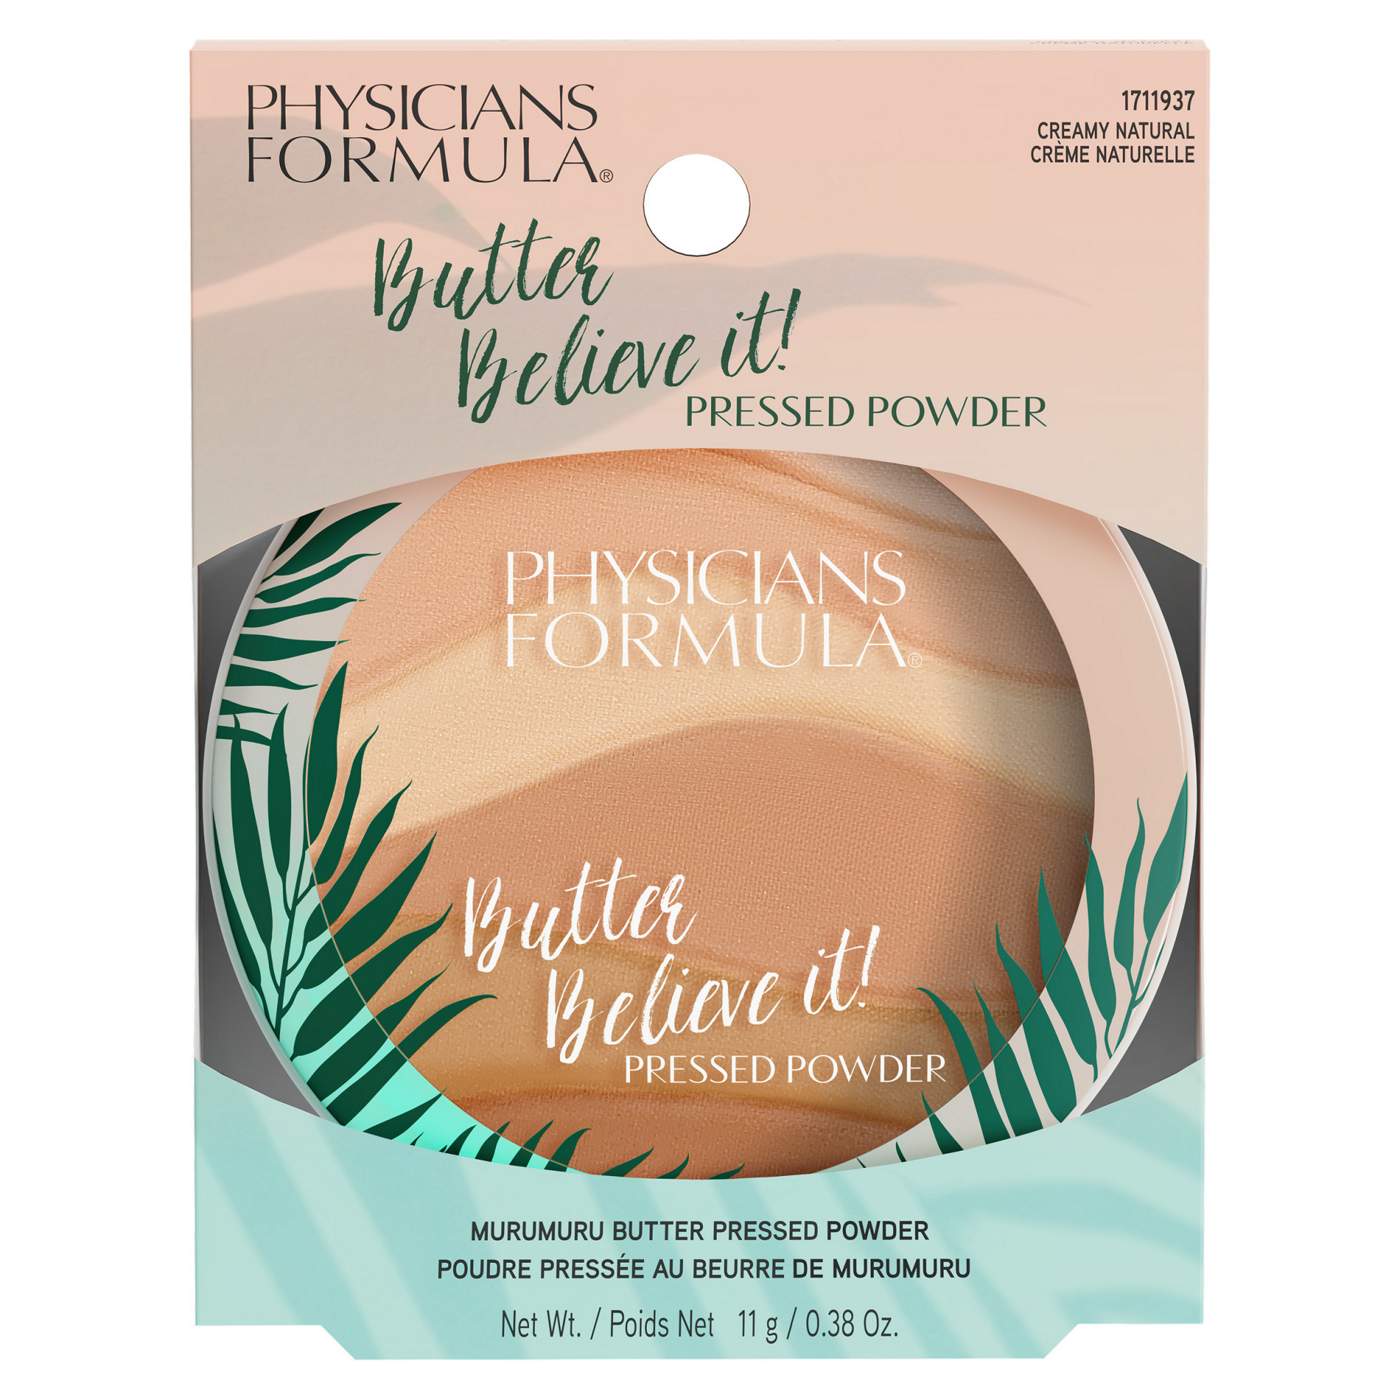 Physicians Formula Butter Believe It! Pressed Powder Creamy Natural; image 1 of 5